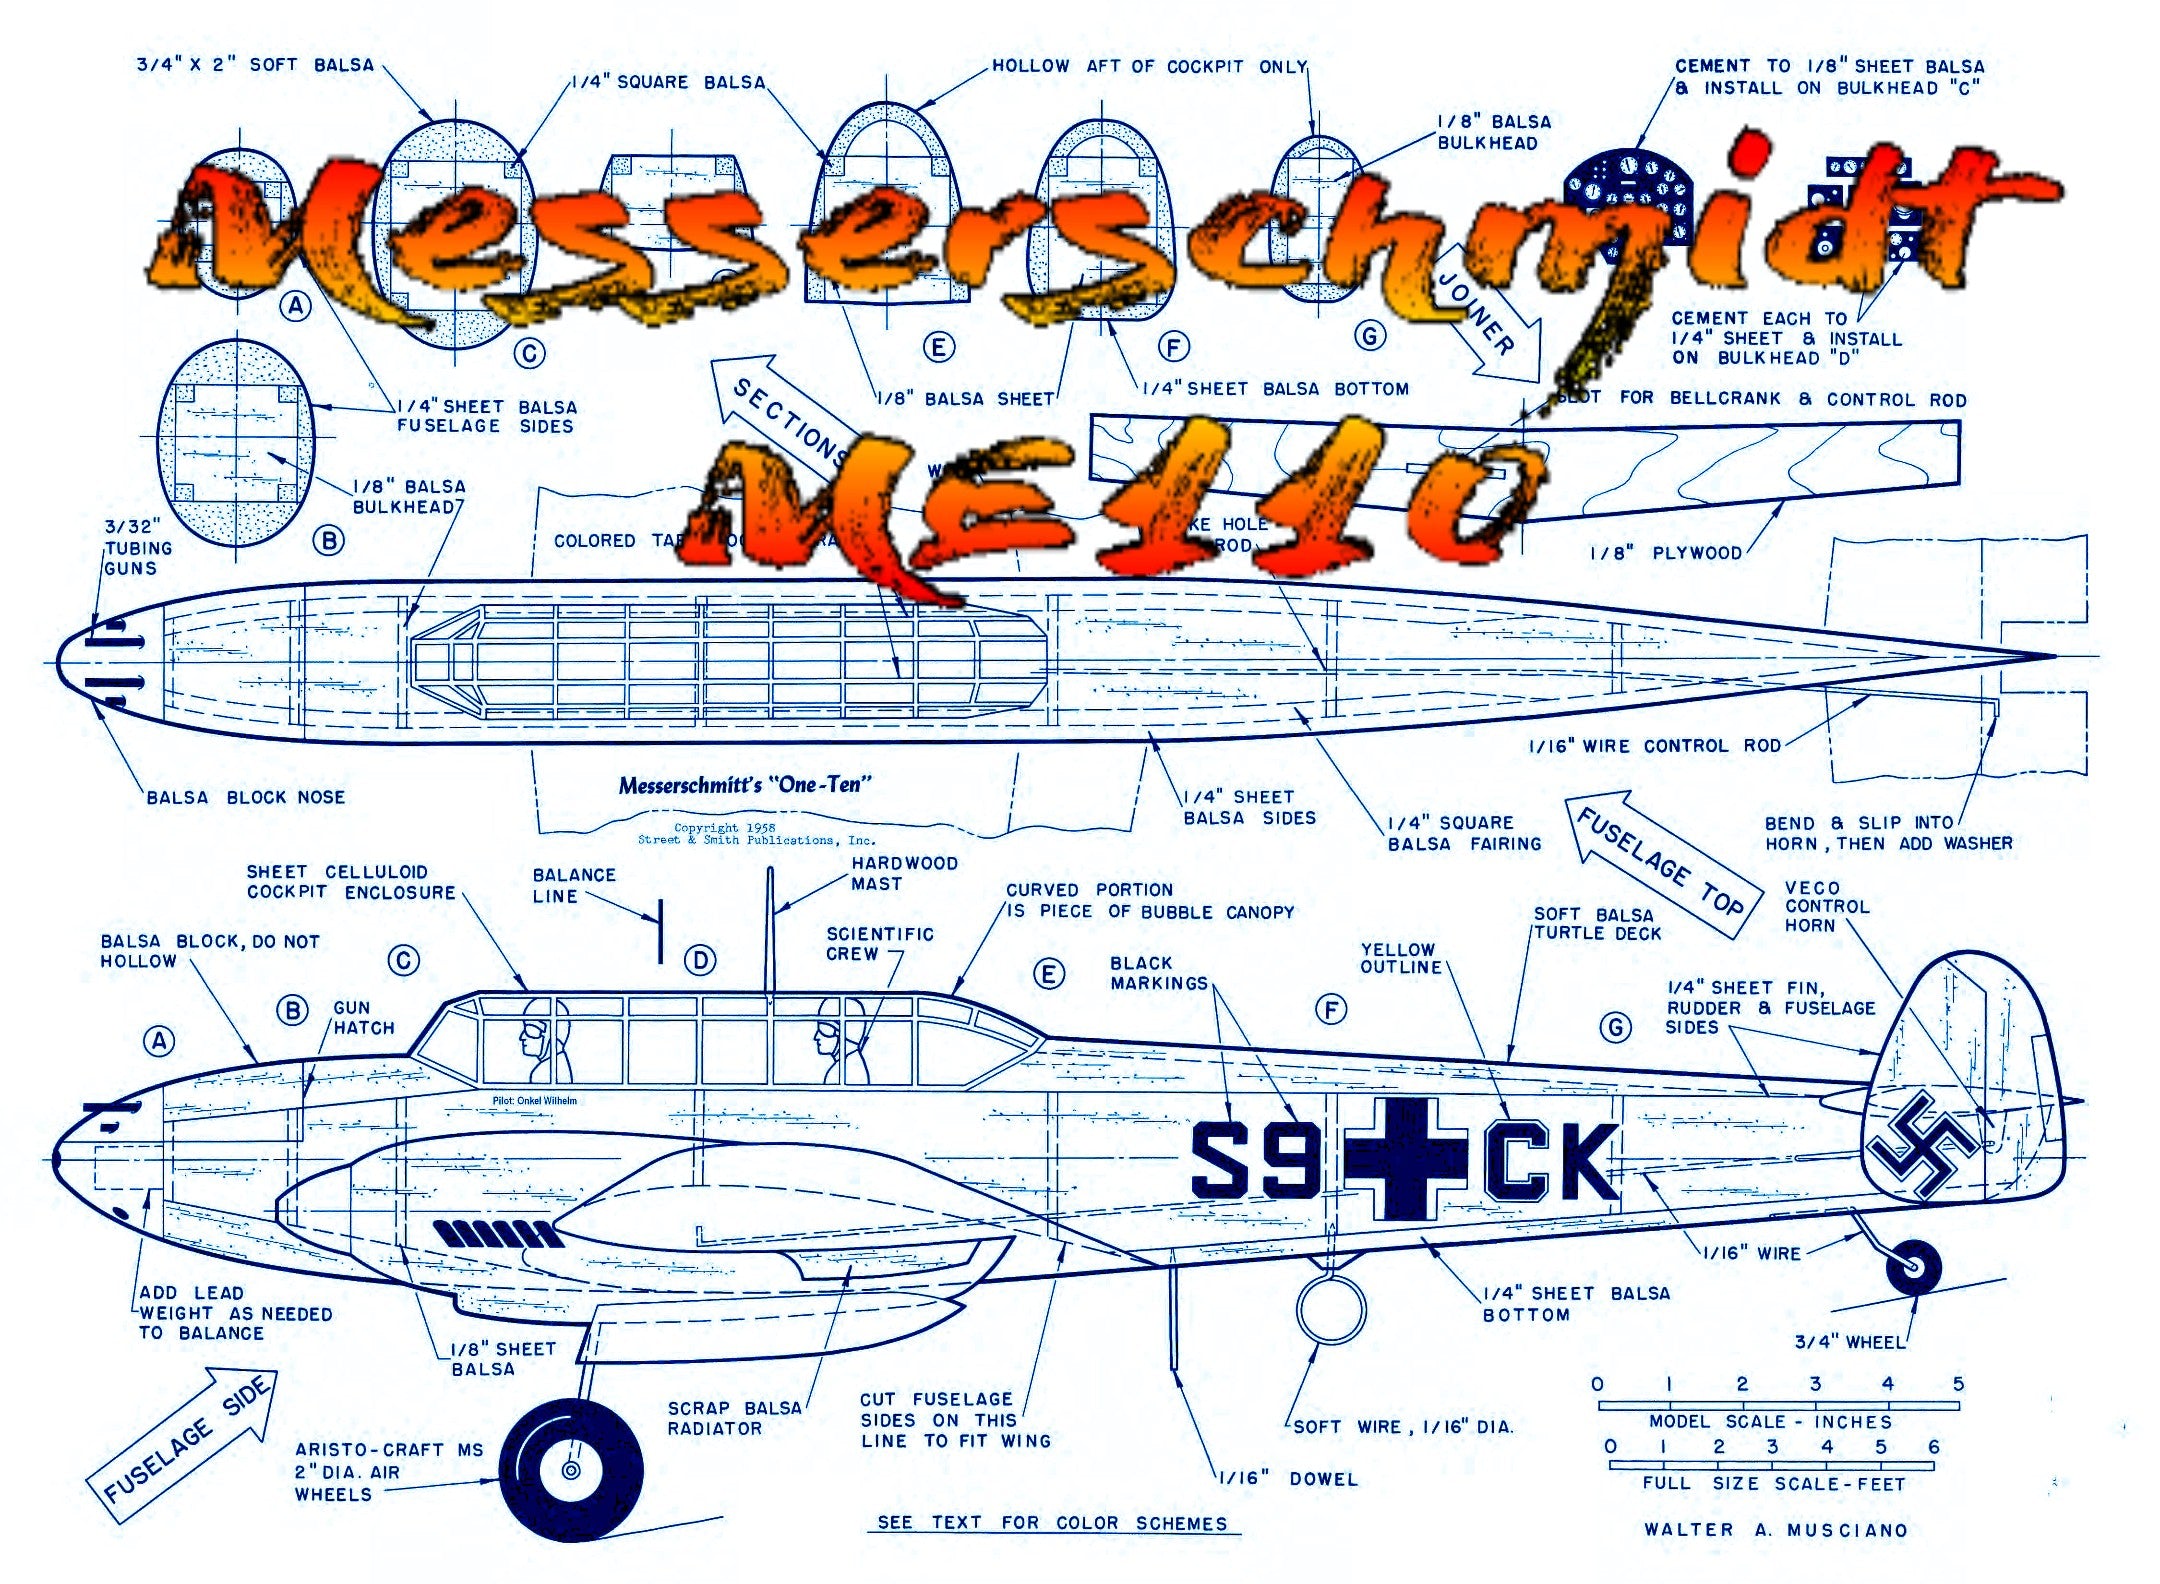 full size printed plans control line scale 1:16 me110 details and markings on the plans are based on a full-size